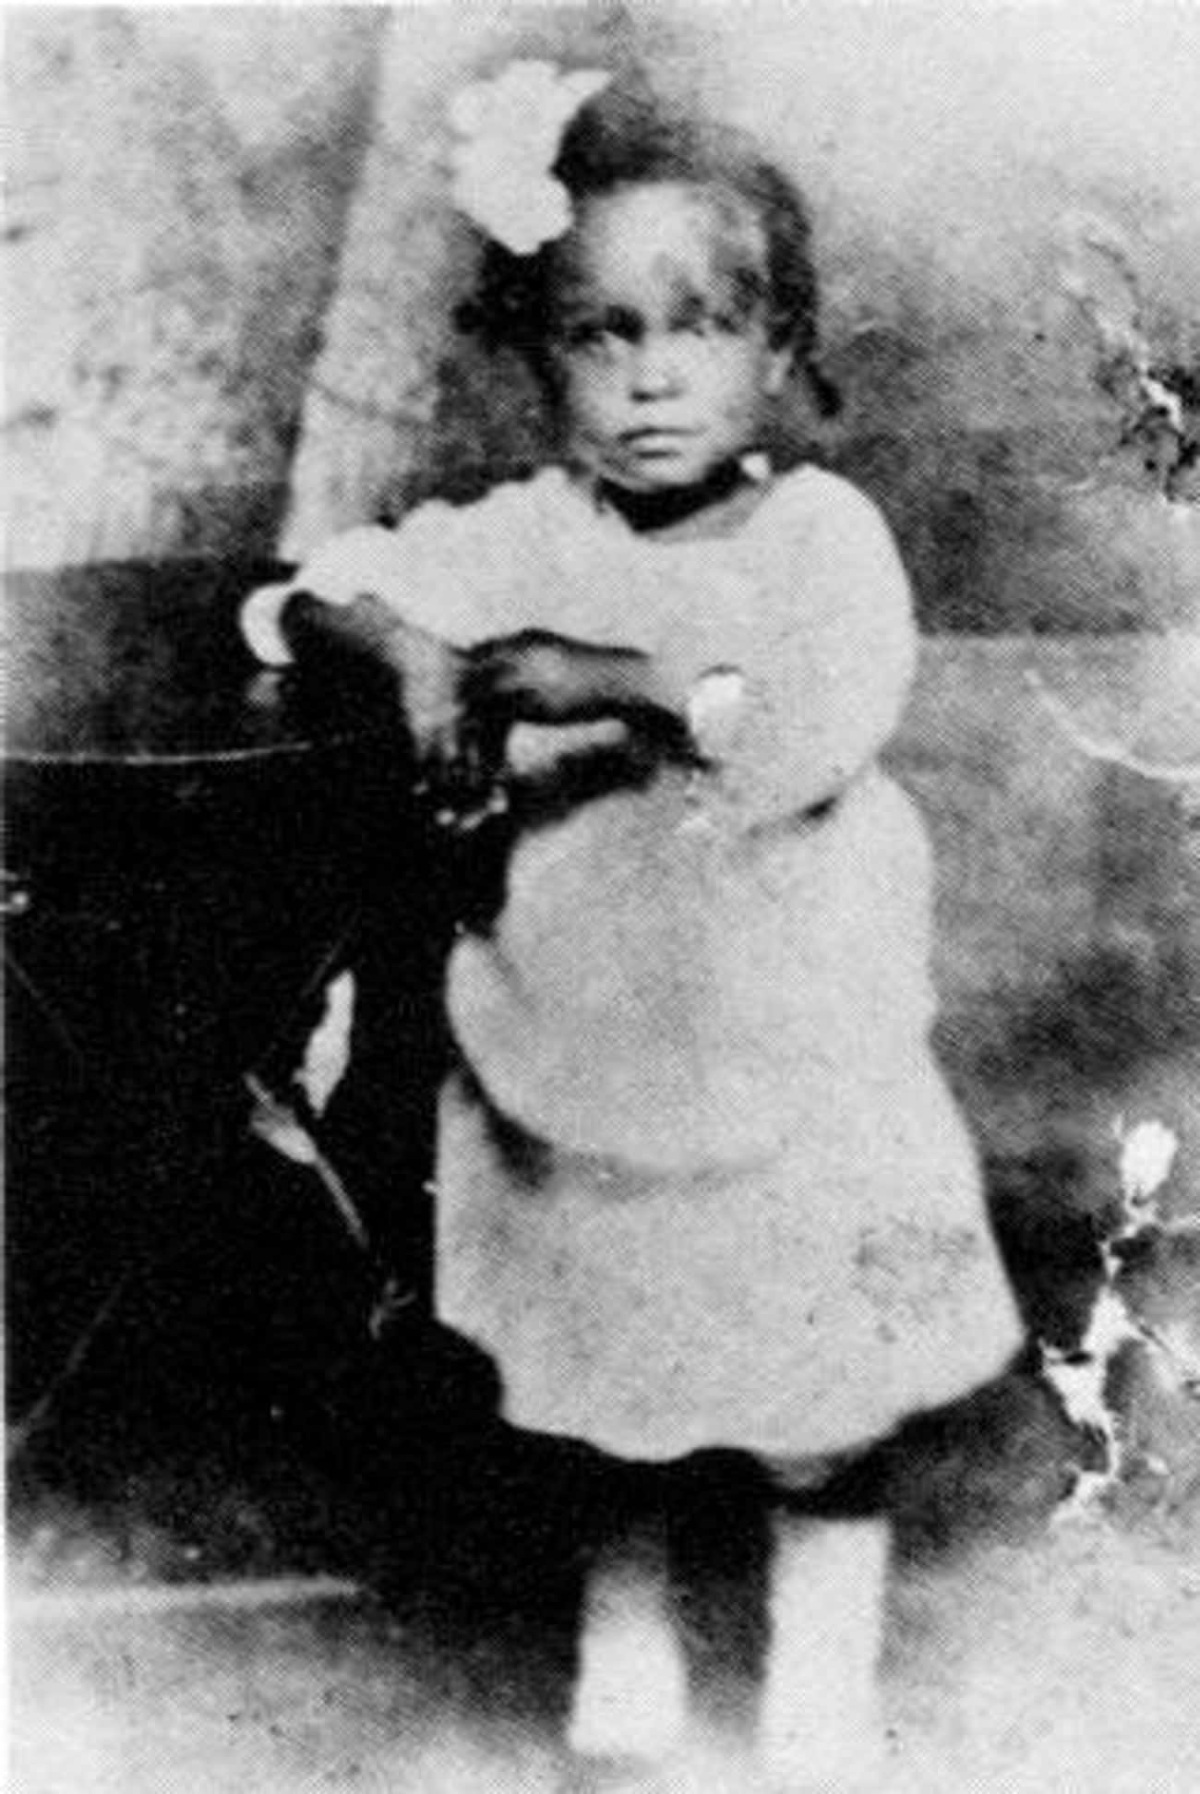 Billie Holiday as a child